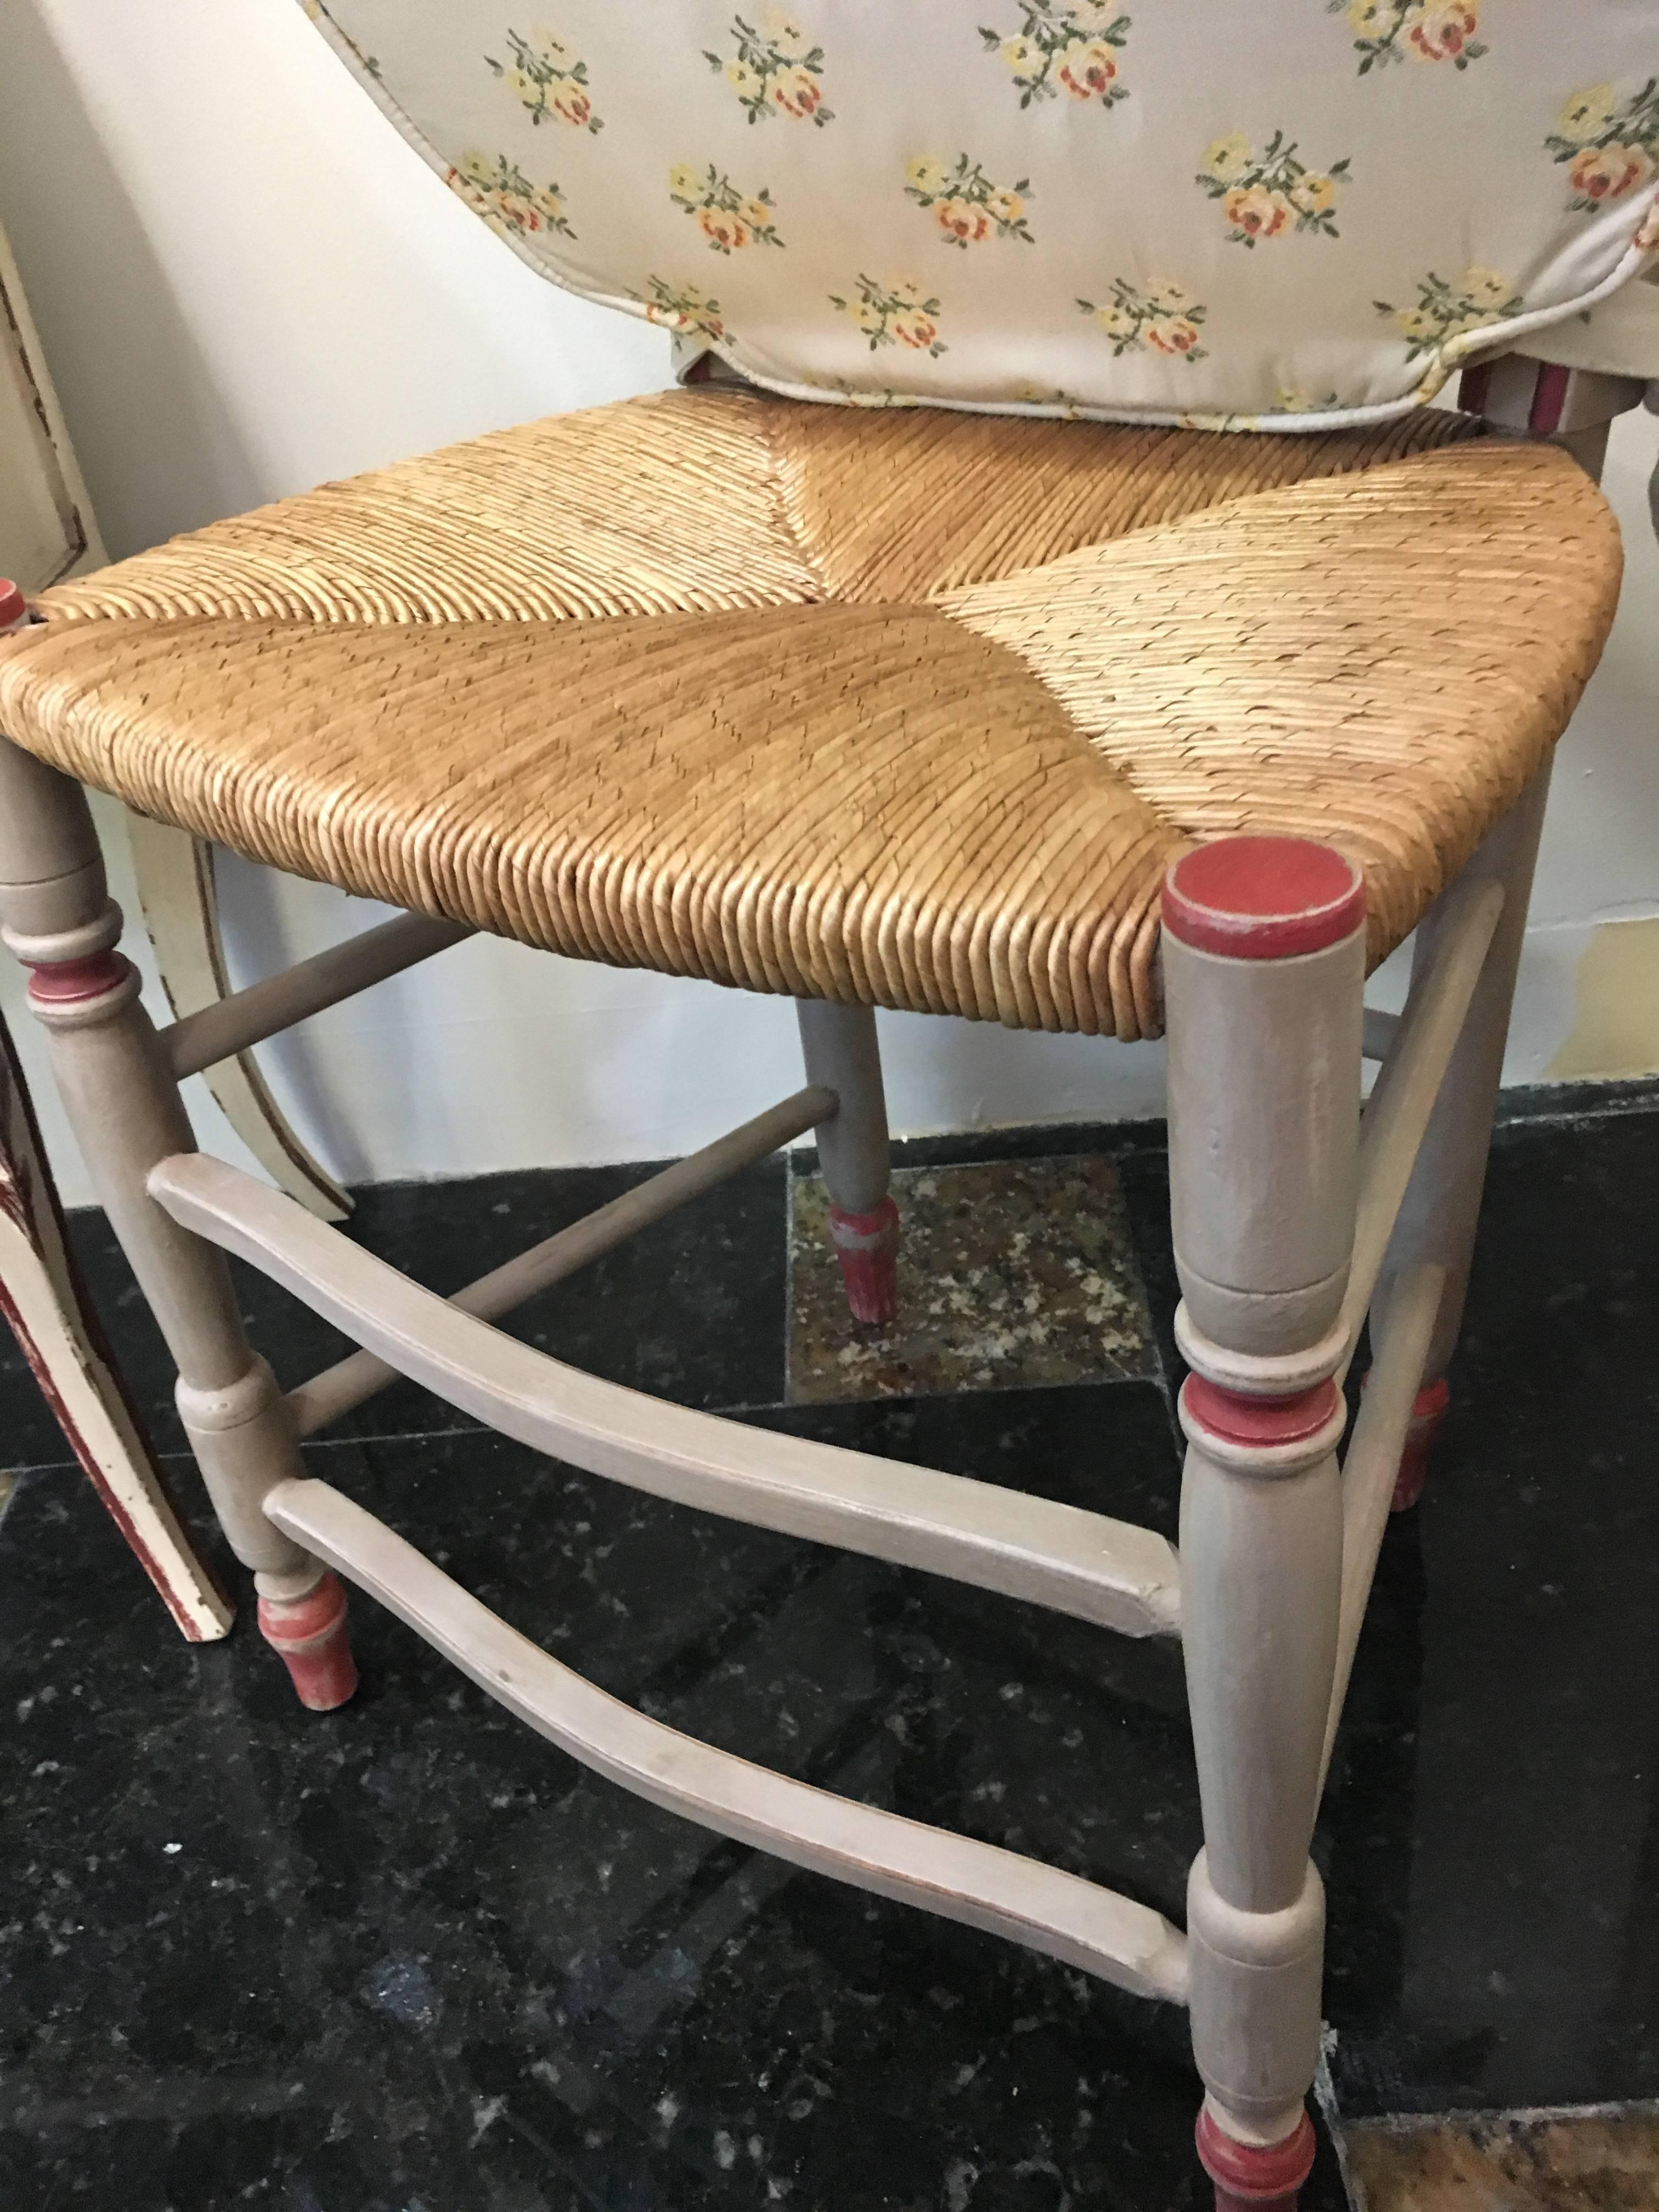 Six dining chairs from 19th century. Painted in light grey with coral accents, rush seats with nice cotton seating cushions covered with small colorful flowers.
All in perfect condition.
France.